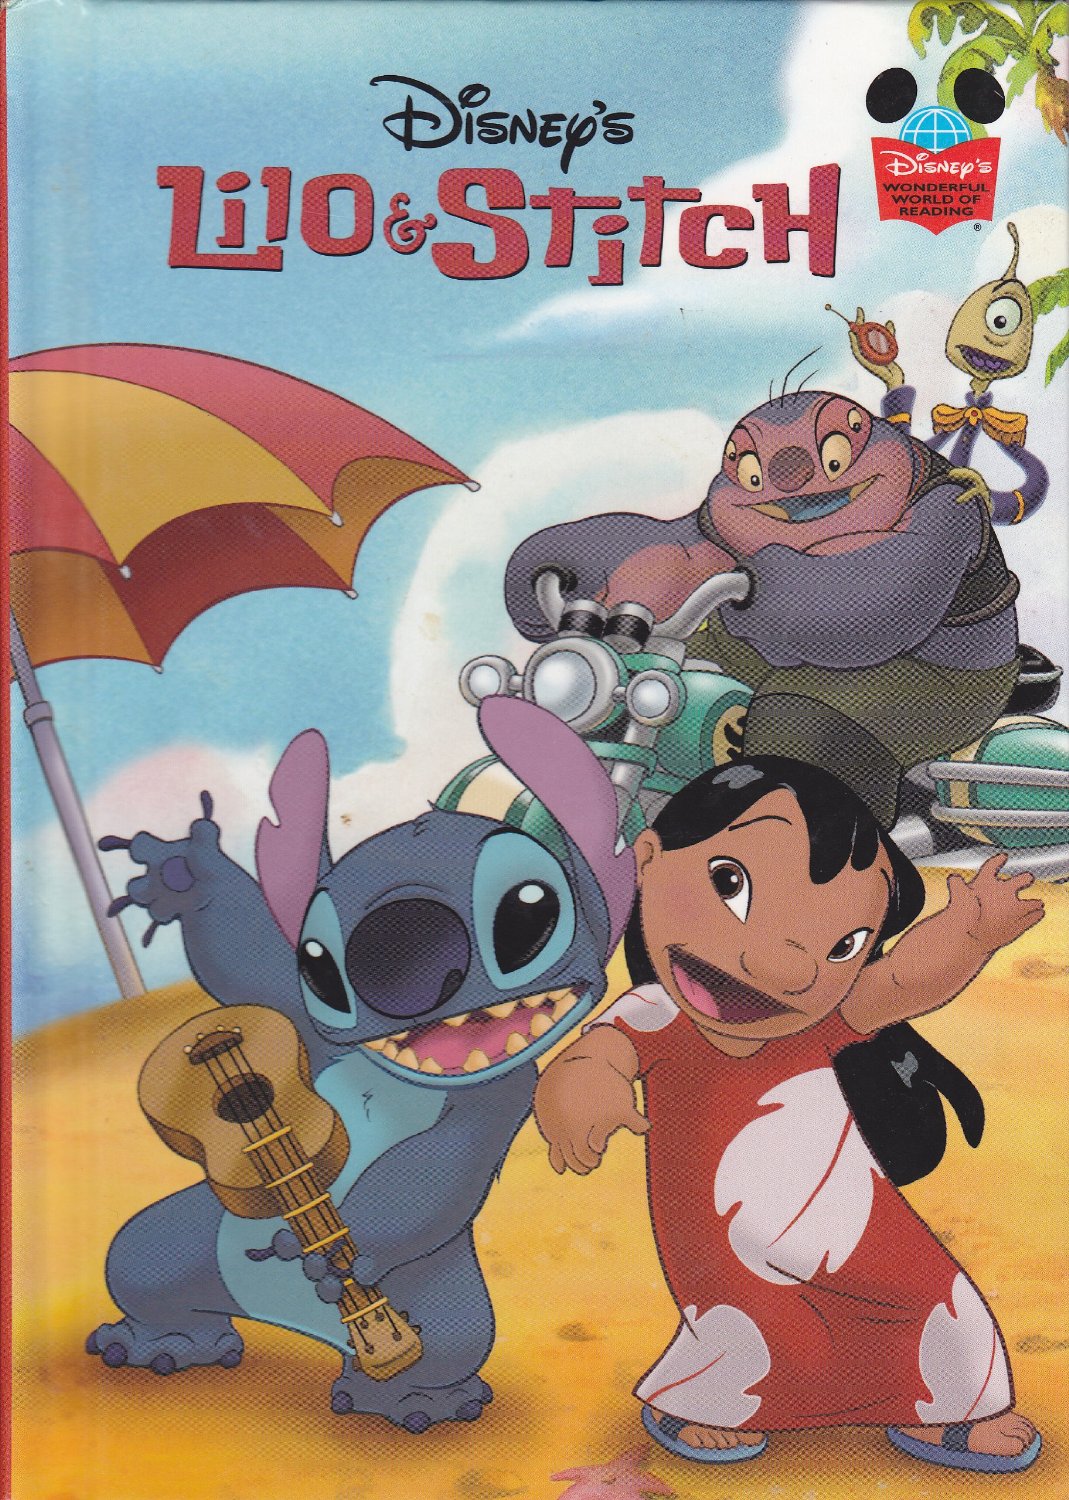 brother bear and lilo and sicht